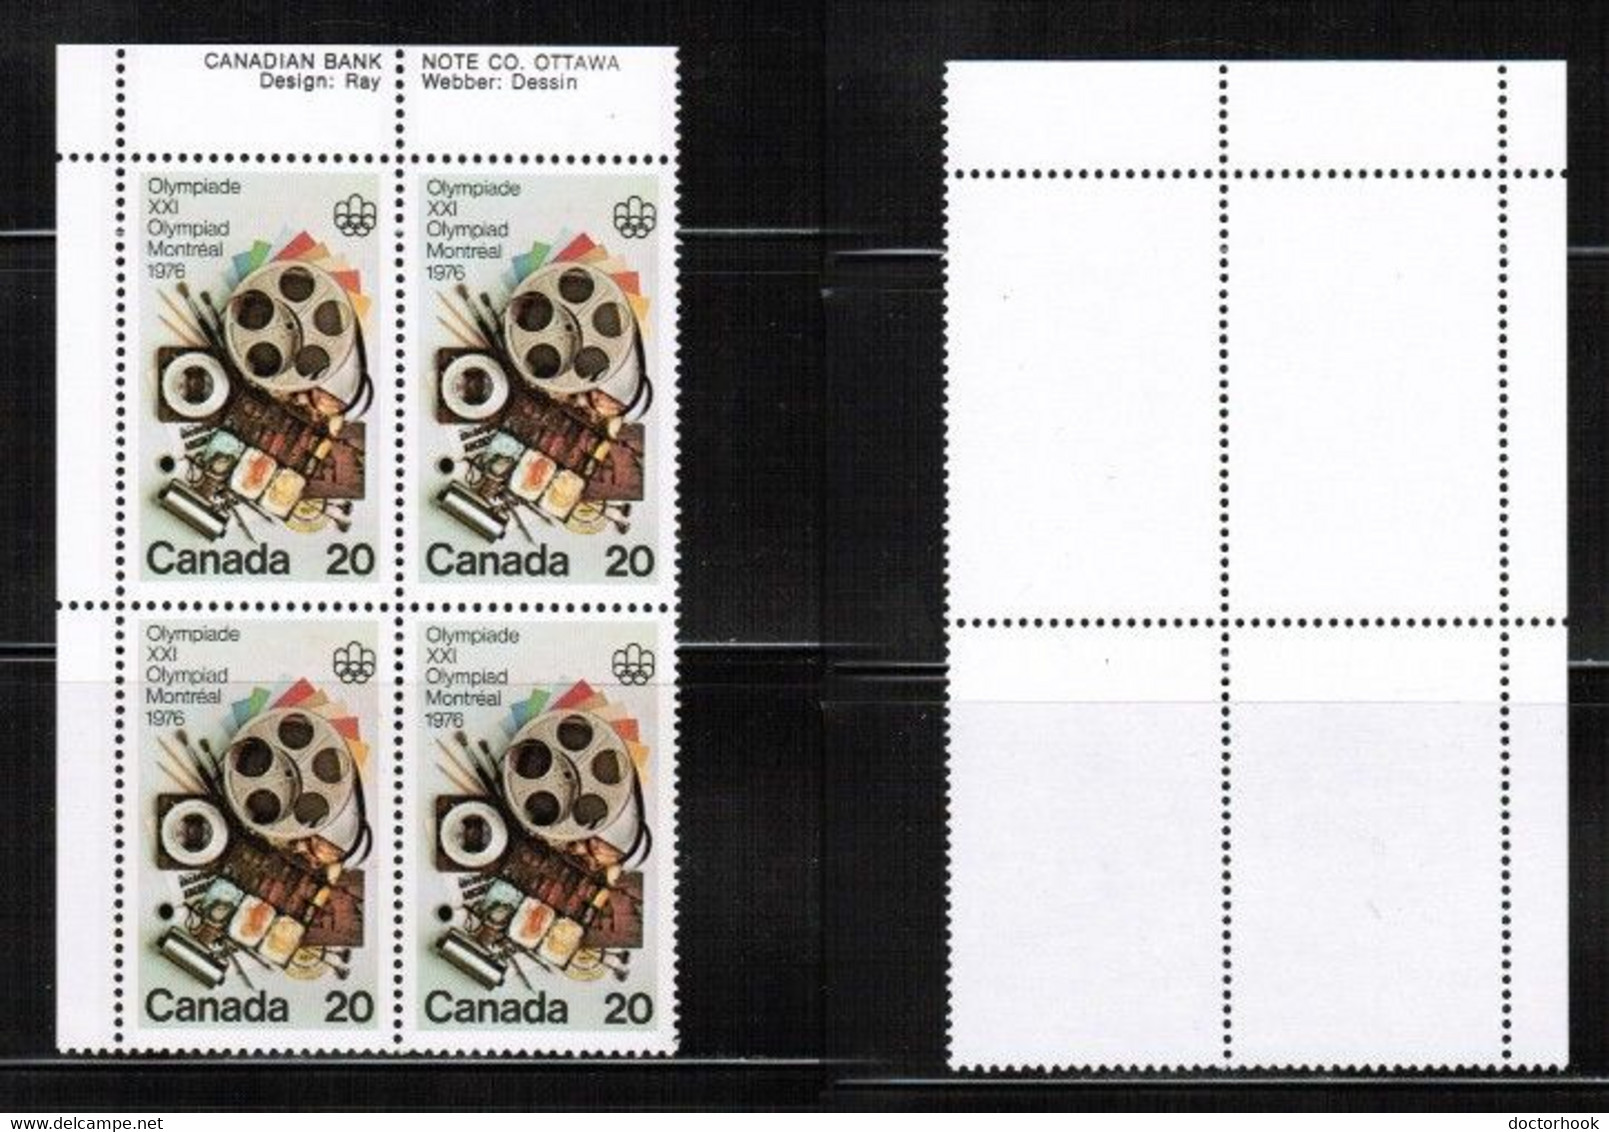 CANADA   Scott # 684** MINT NH INSCRIPTION BLOCK Of 4 CONDITION AS PER SCAN (LG-1467) - Num. Planches & Inscriptions Marge